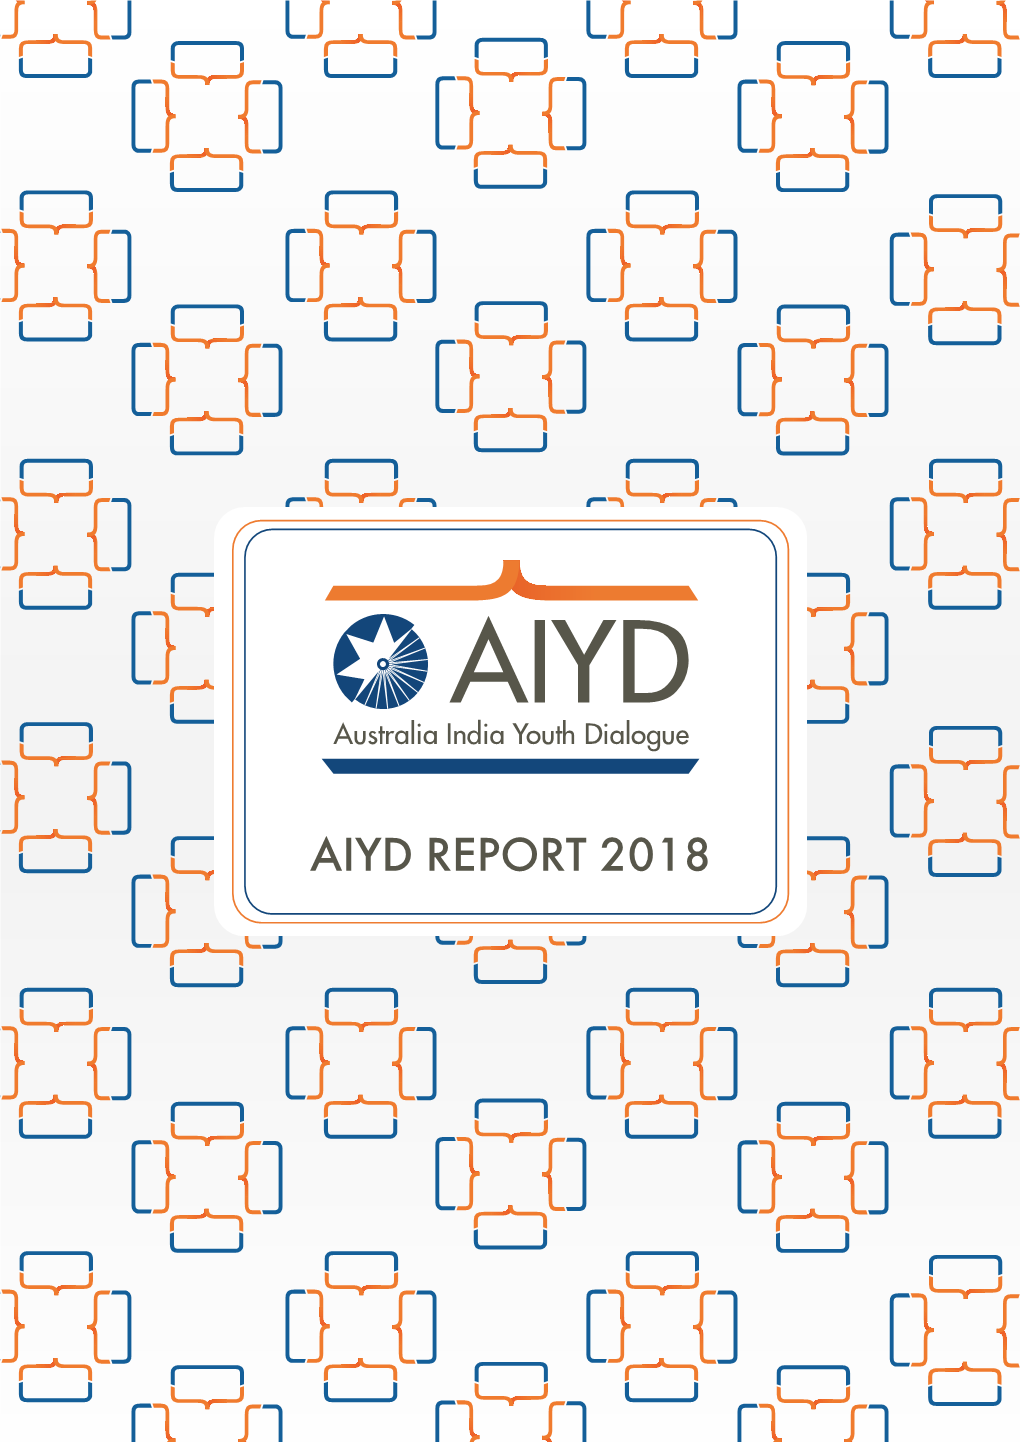 AIYD REPORT 2018 Disclaimer